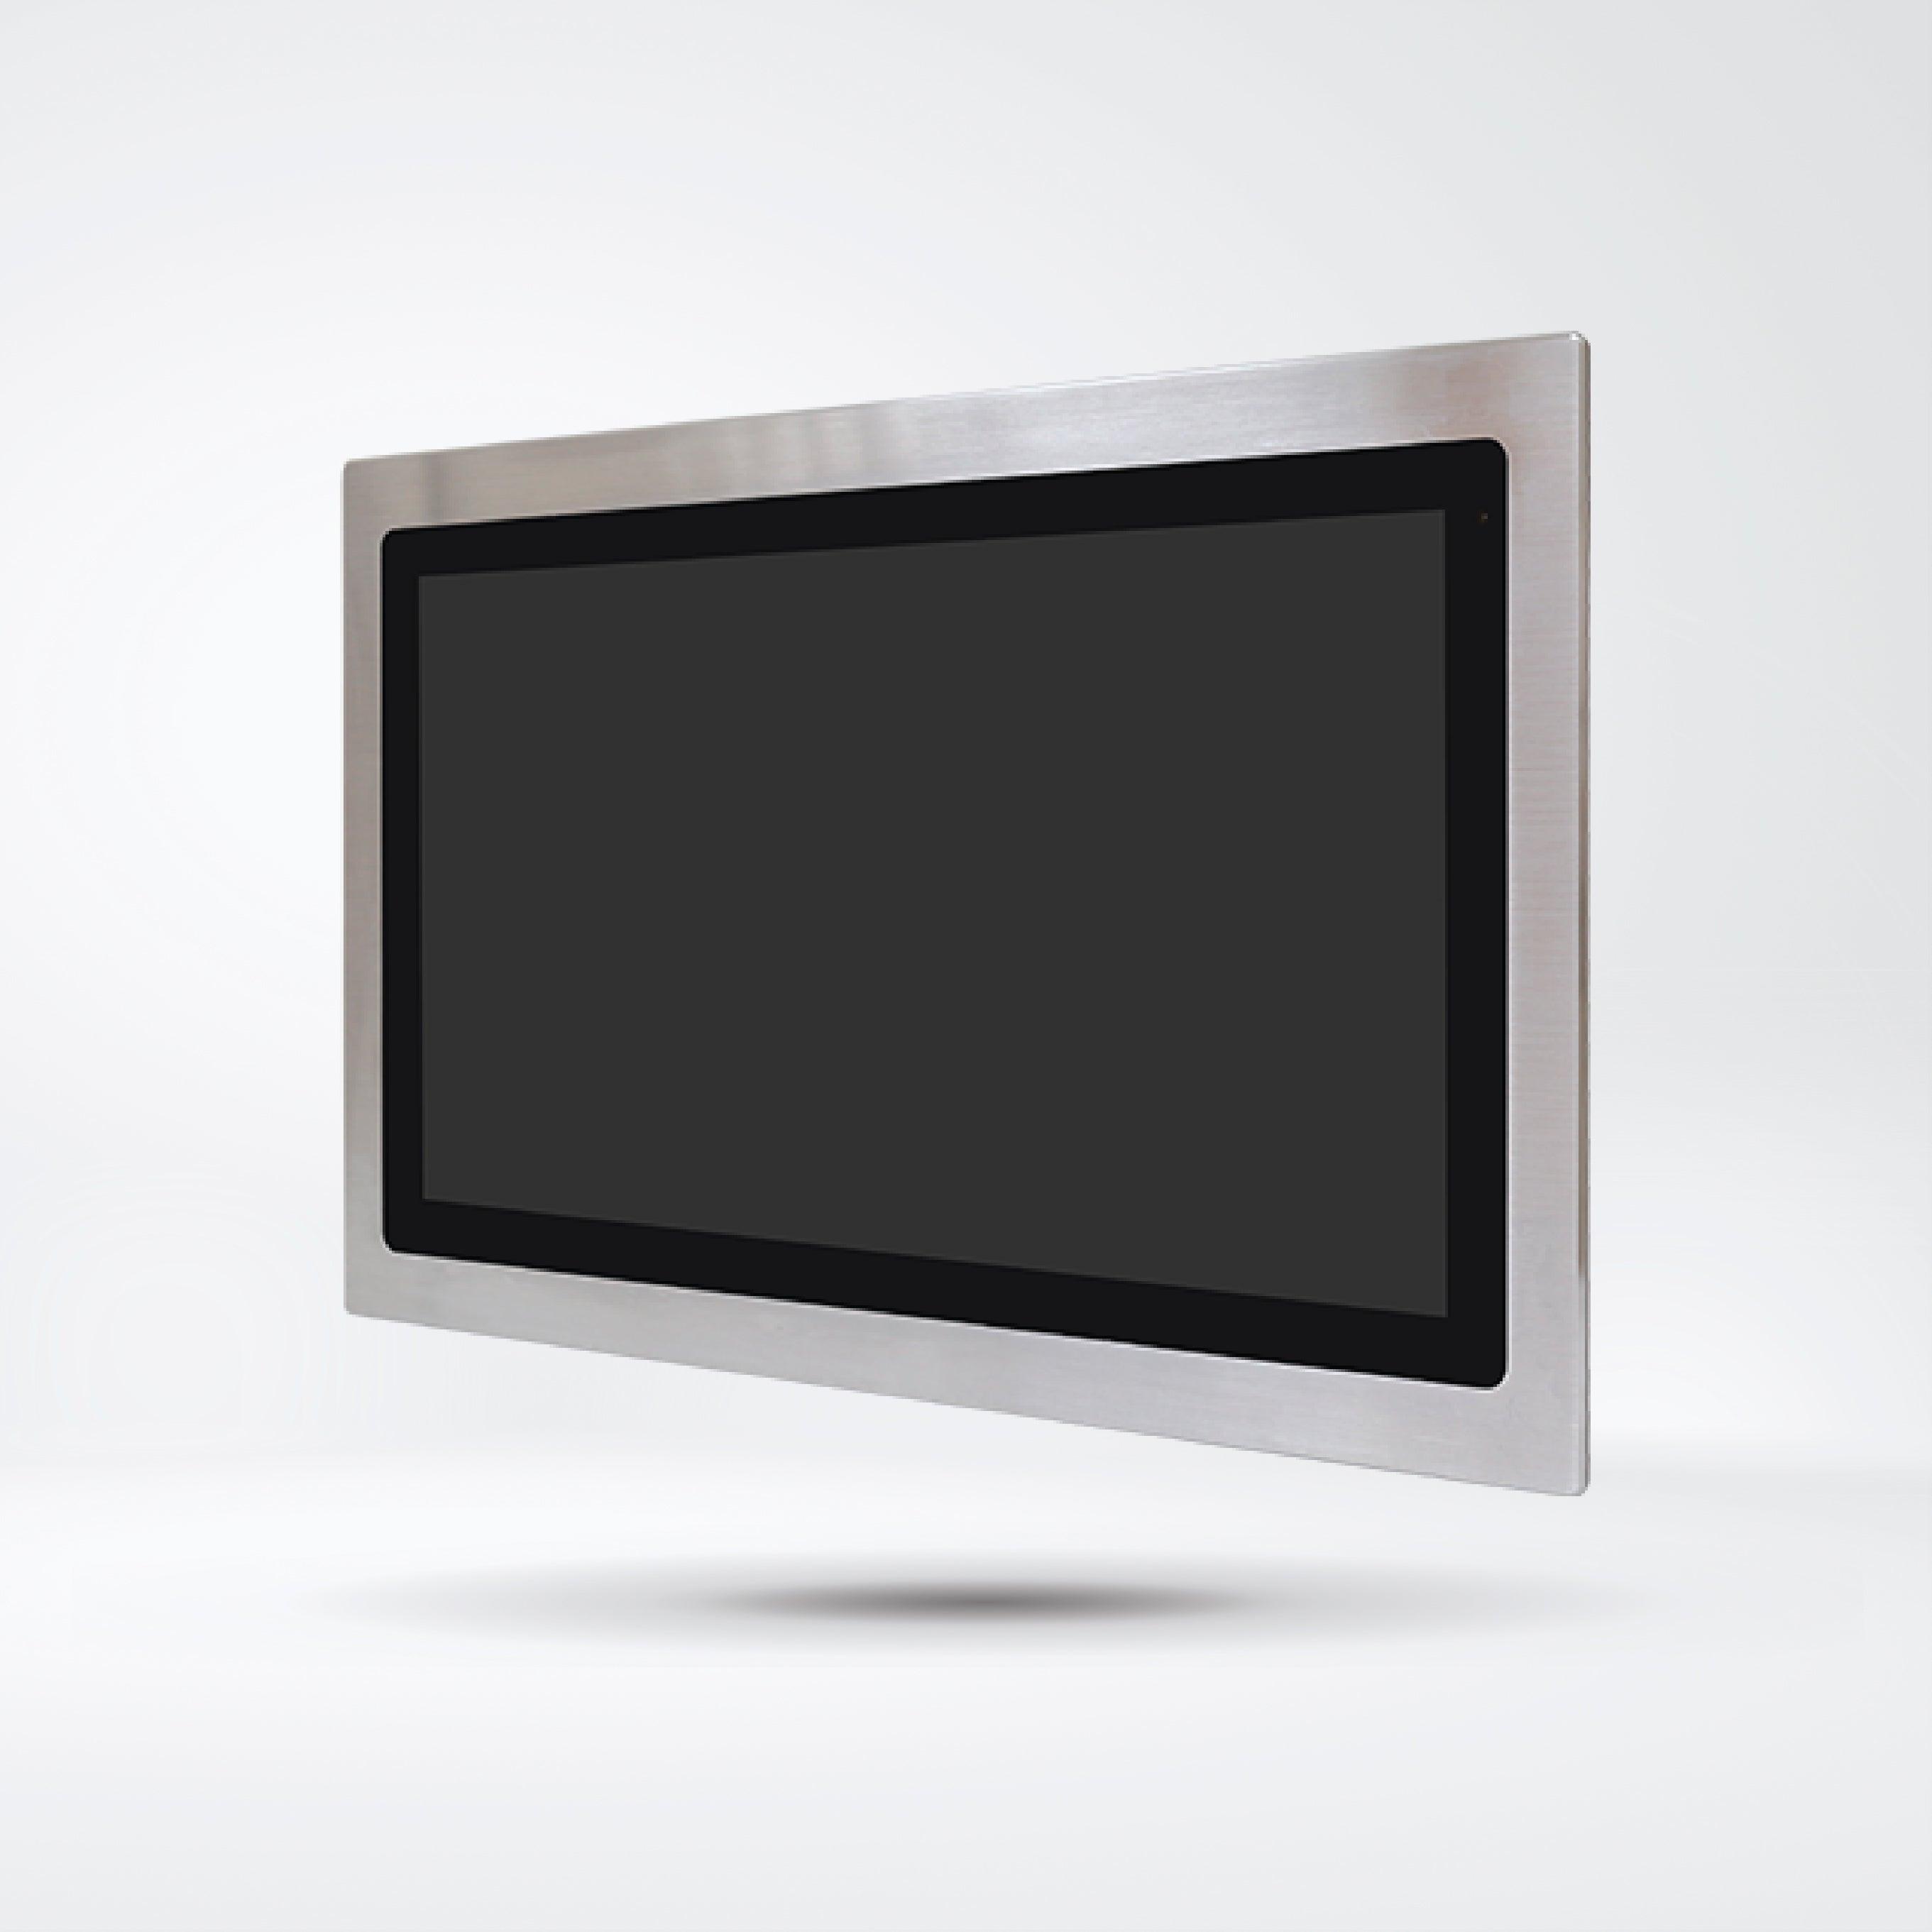 FABS-121GH 21.5” Flat Front Panel IP66 Stainless Chassis Display - Riverplus